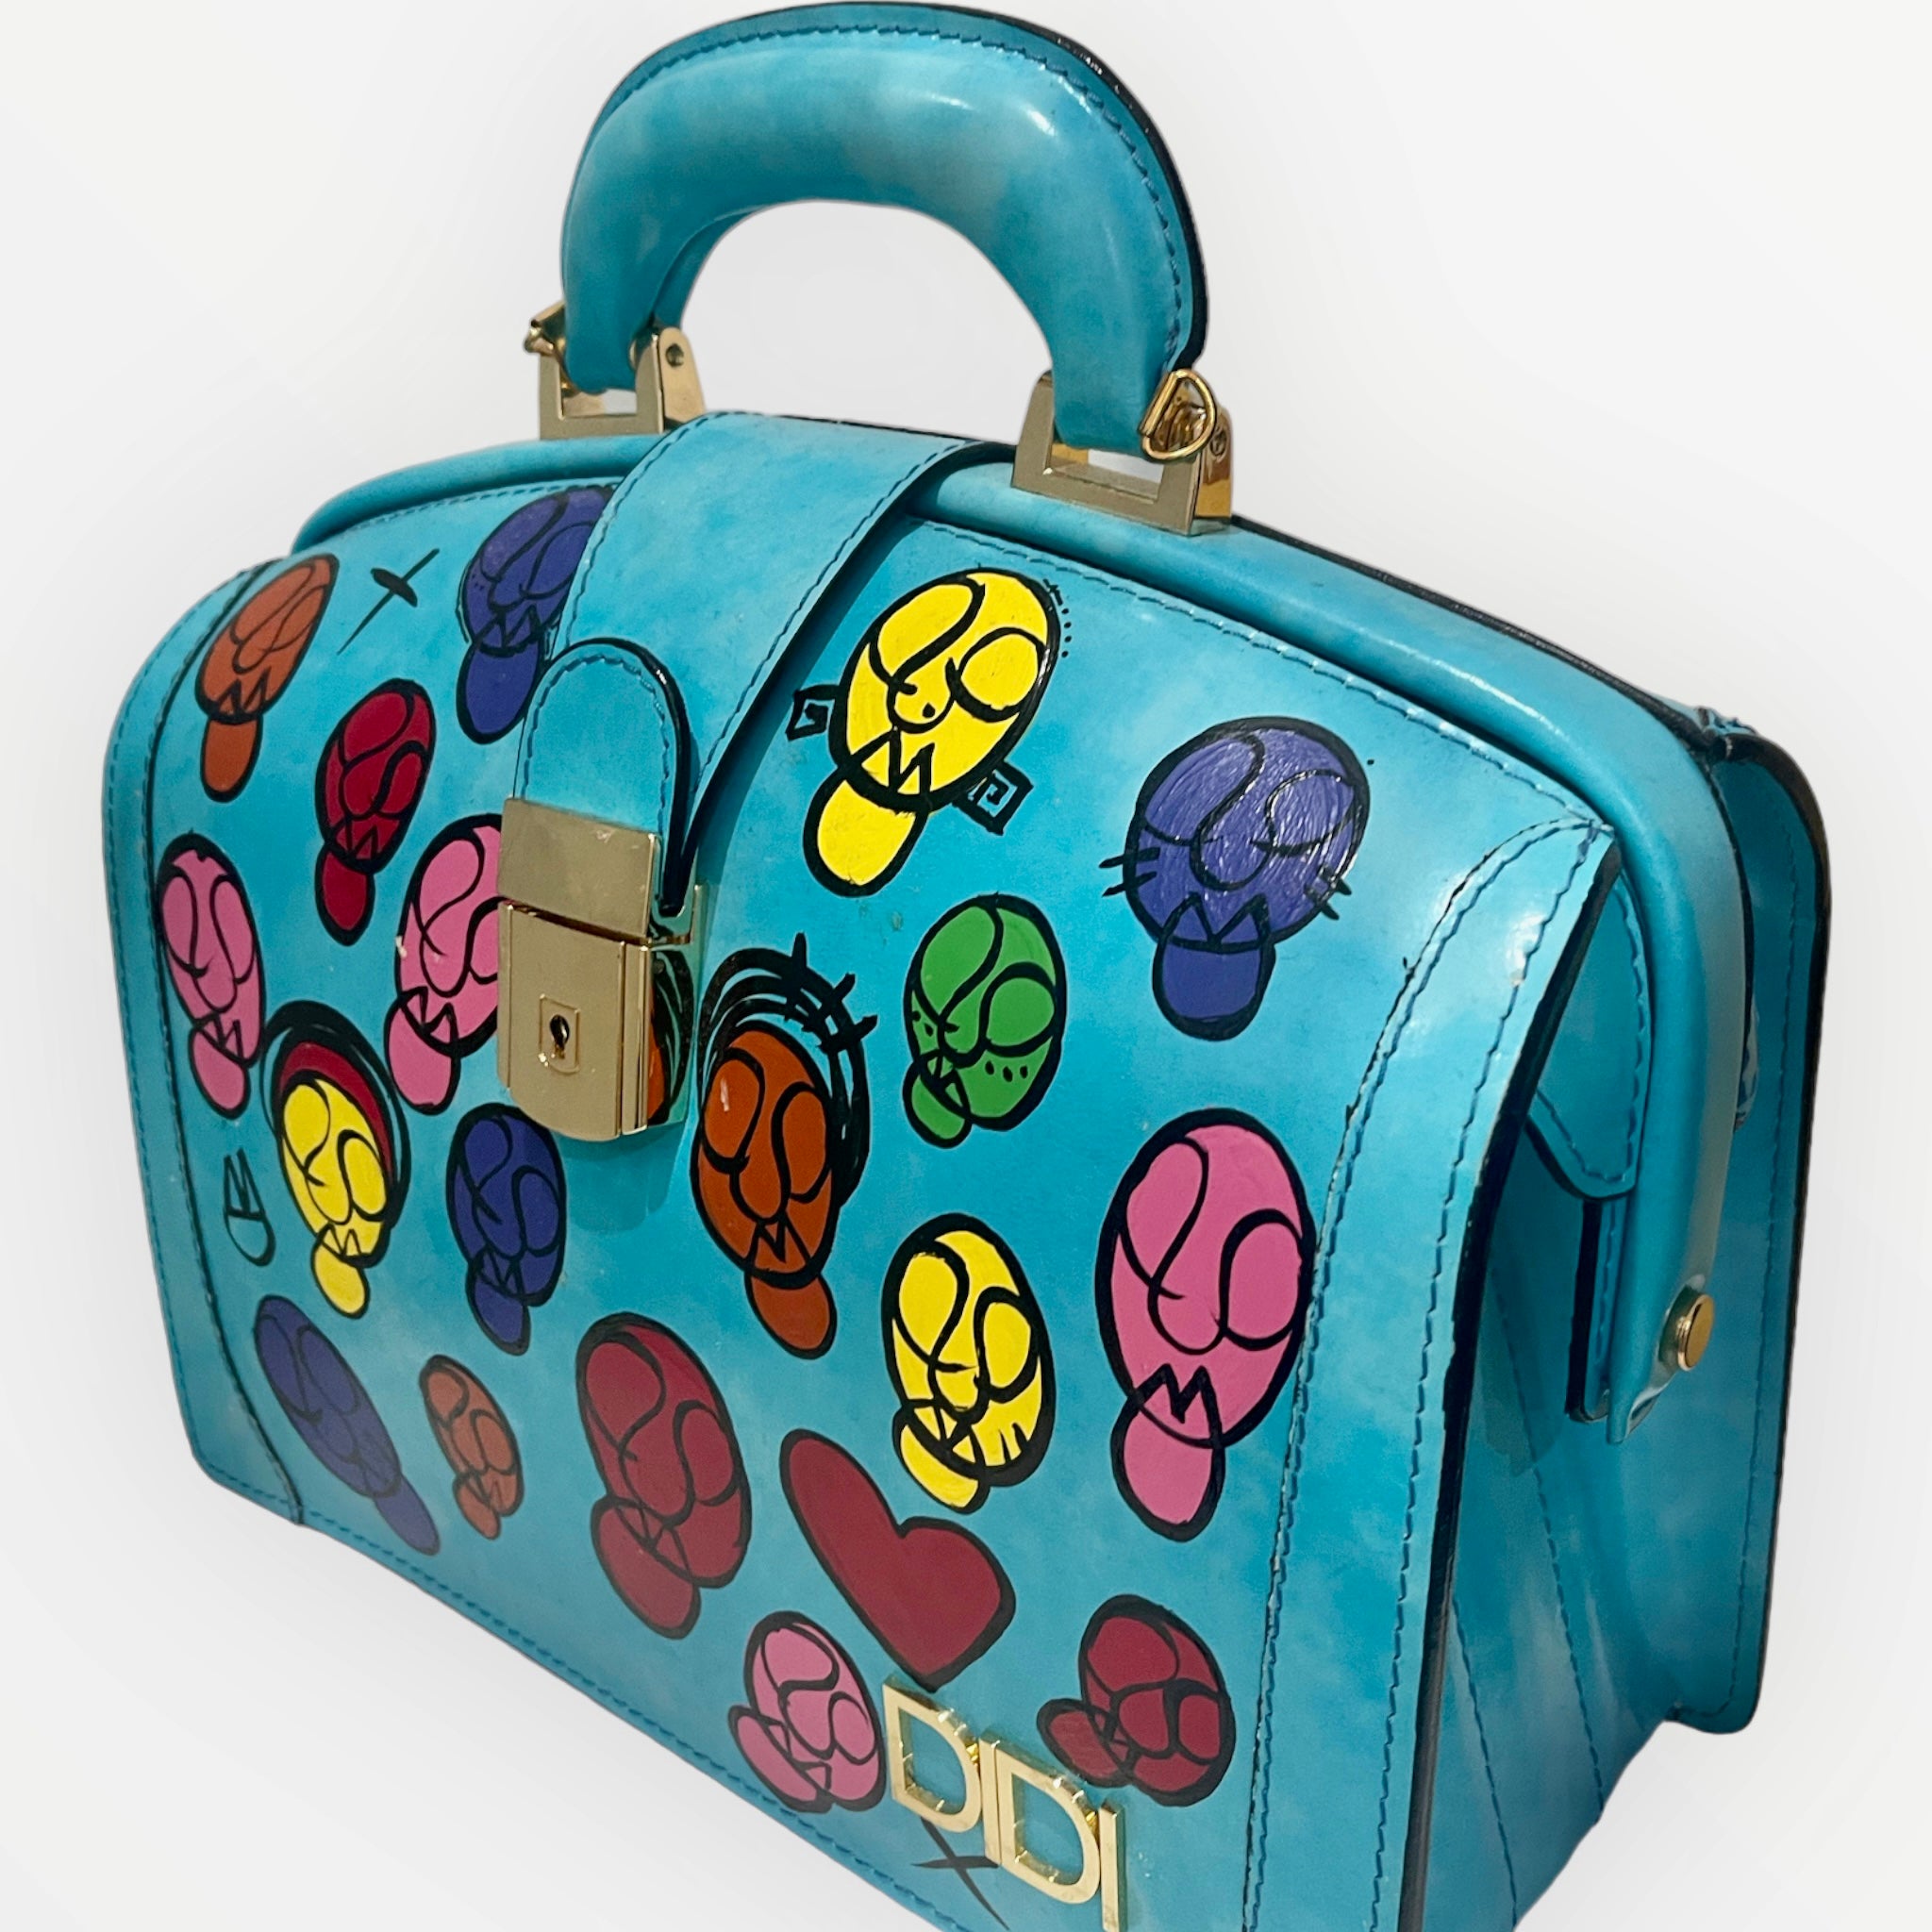 Hand-Painted Briefcase